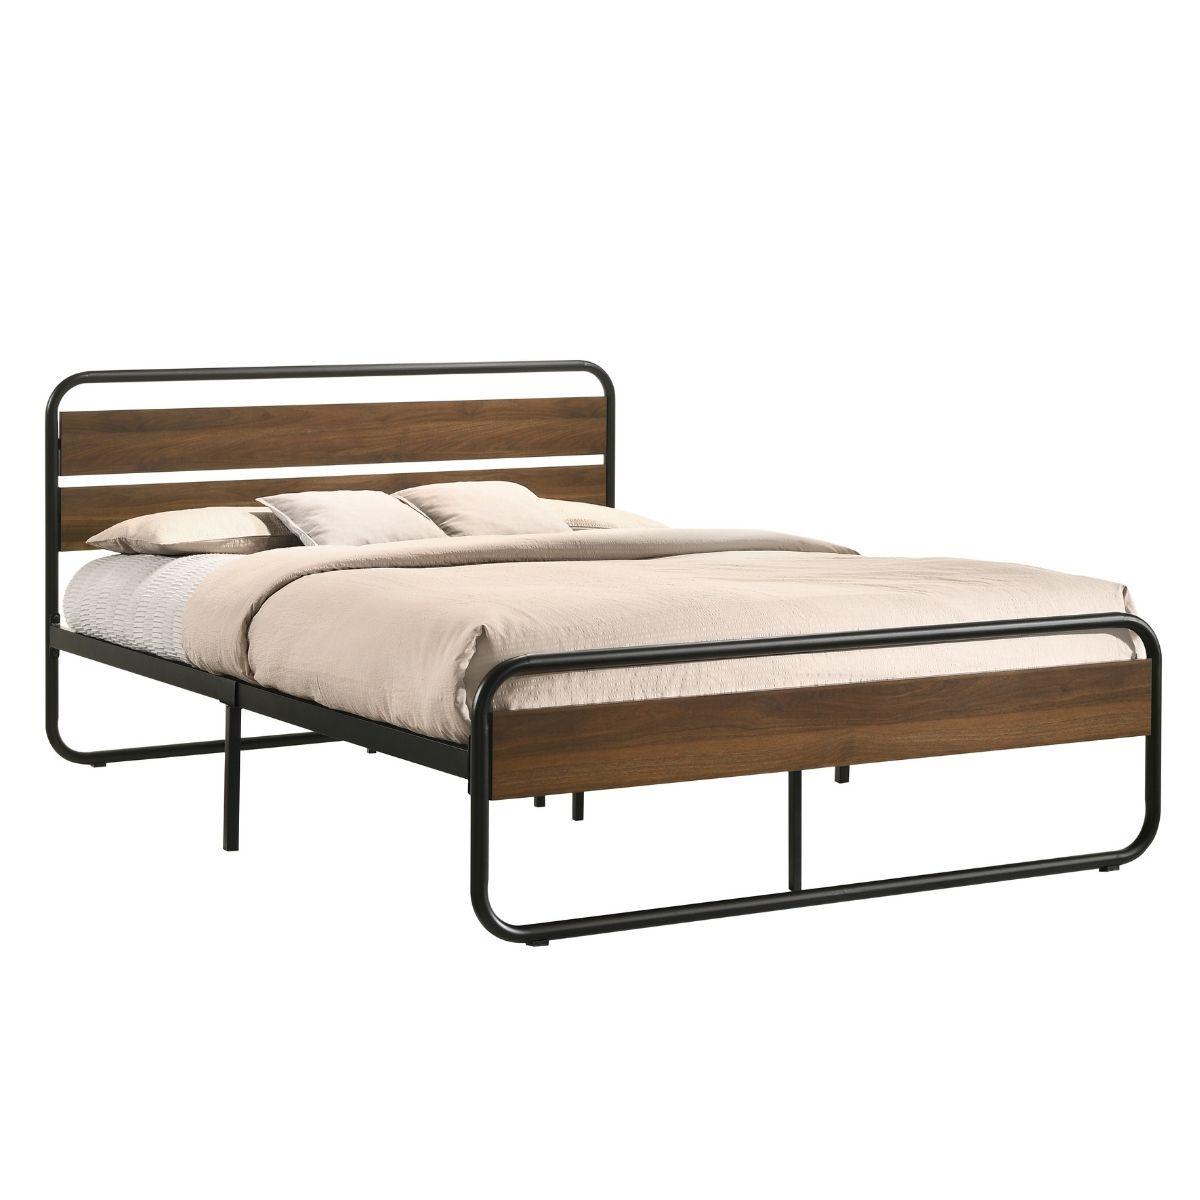 Molly Industrial Bed King Size